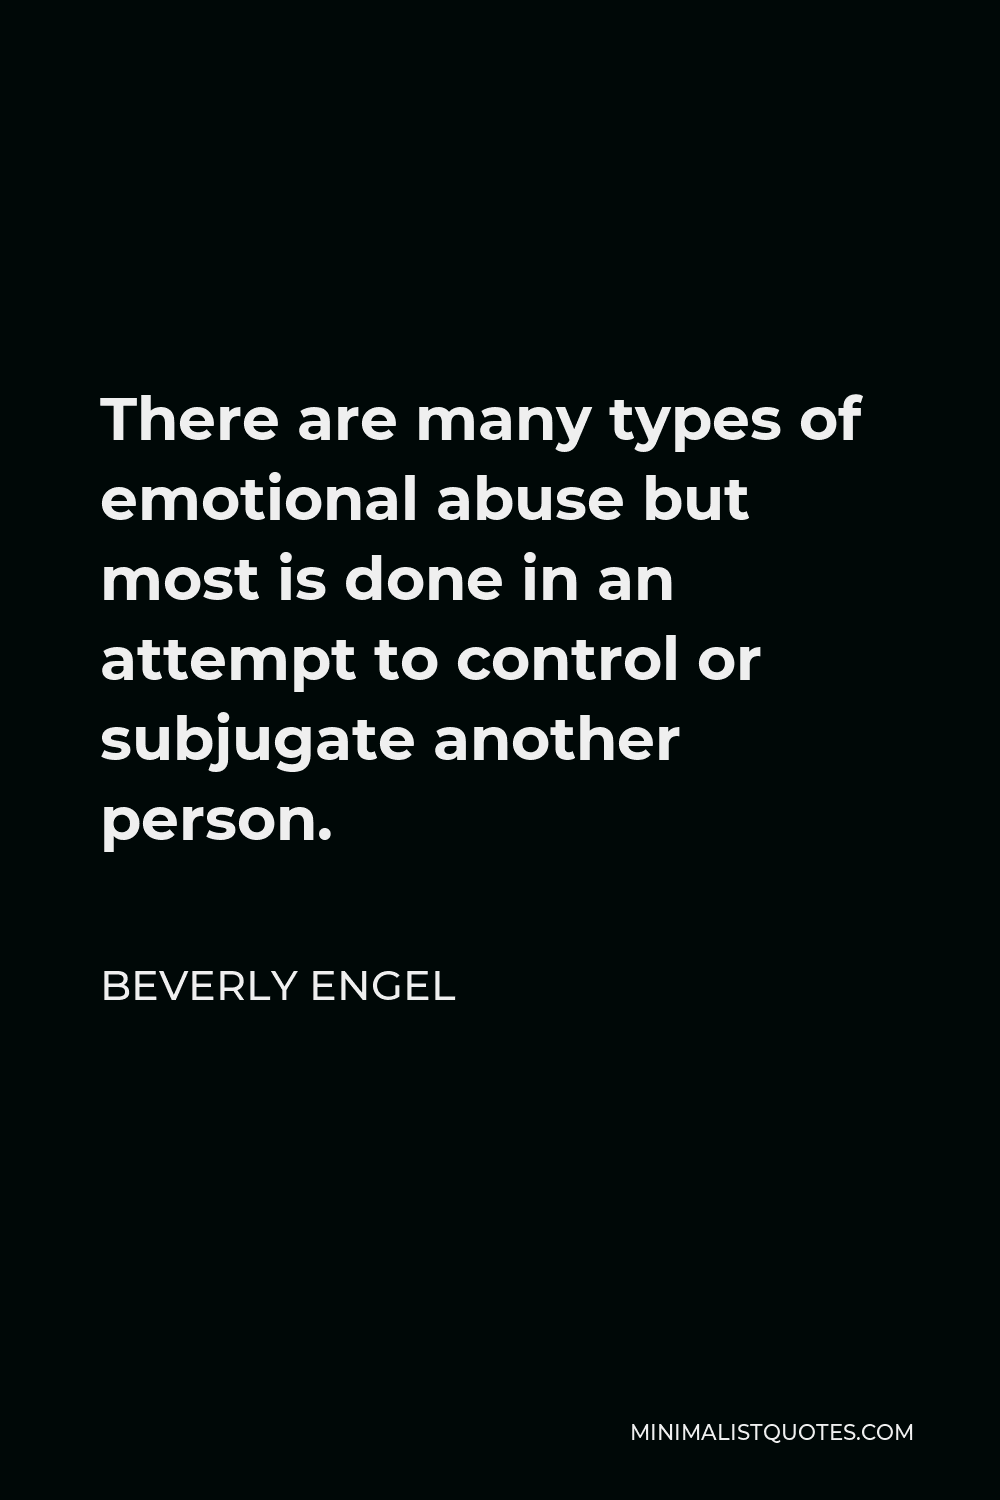 Beverly Engel Quote - There are many types of emotional abuse but most is done in an attempt to control or subjugate another person.